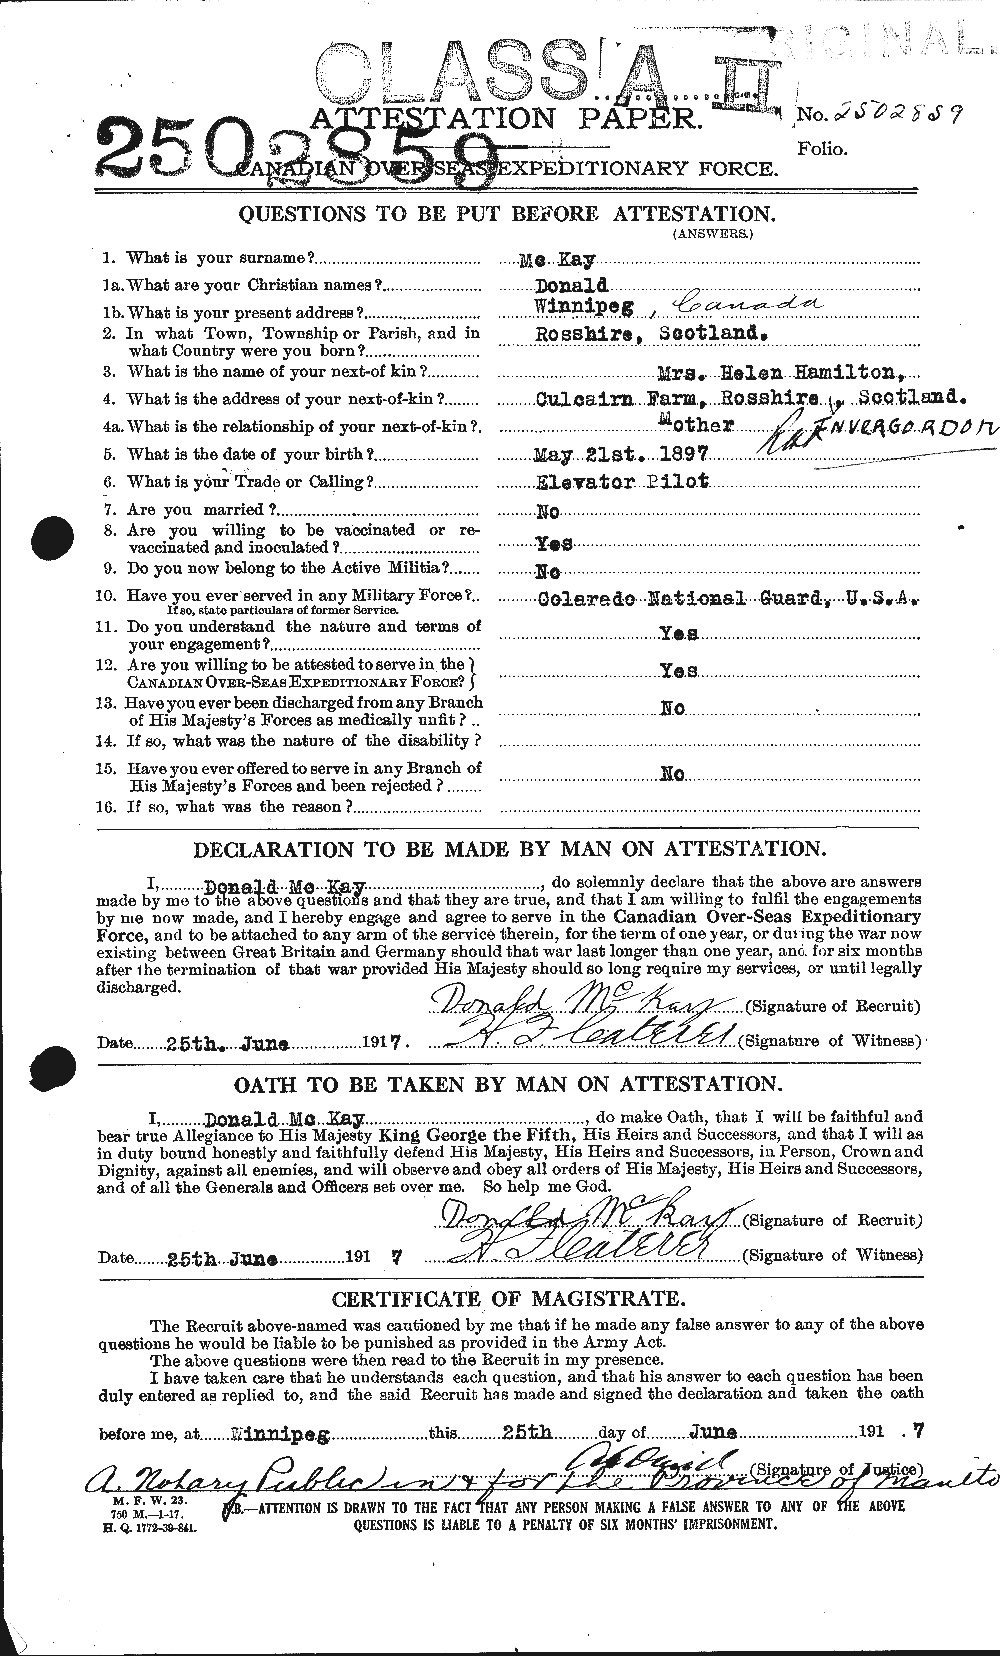 Personnel Records of the First World War - CEF 531154a